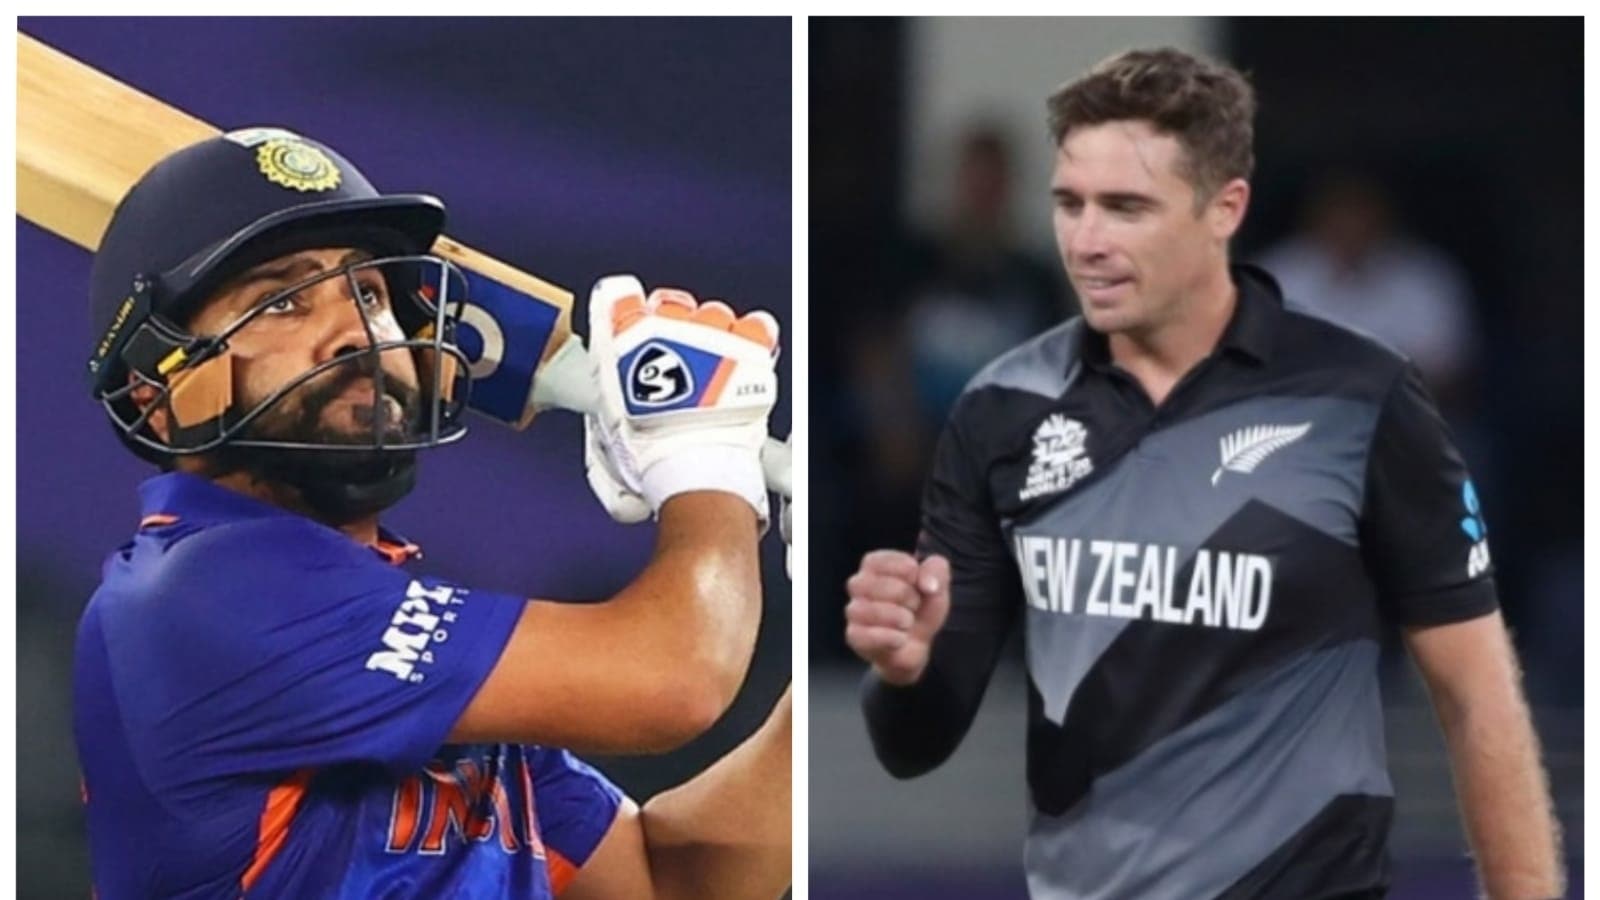 India vs New Zealand 1st T20 Live Streaming The match will start